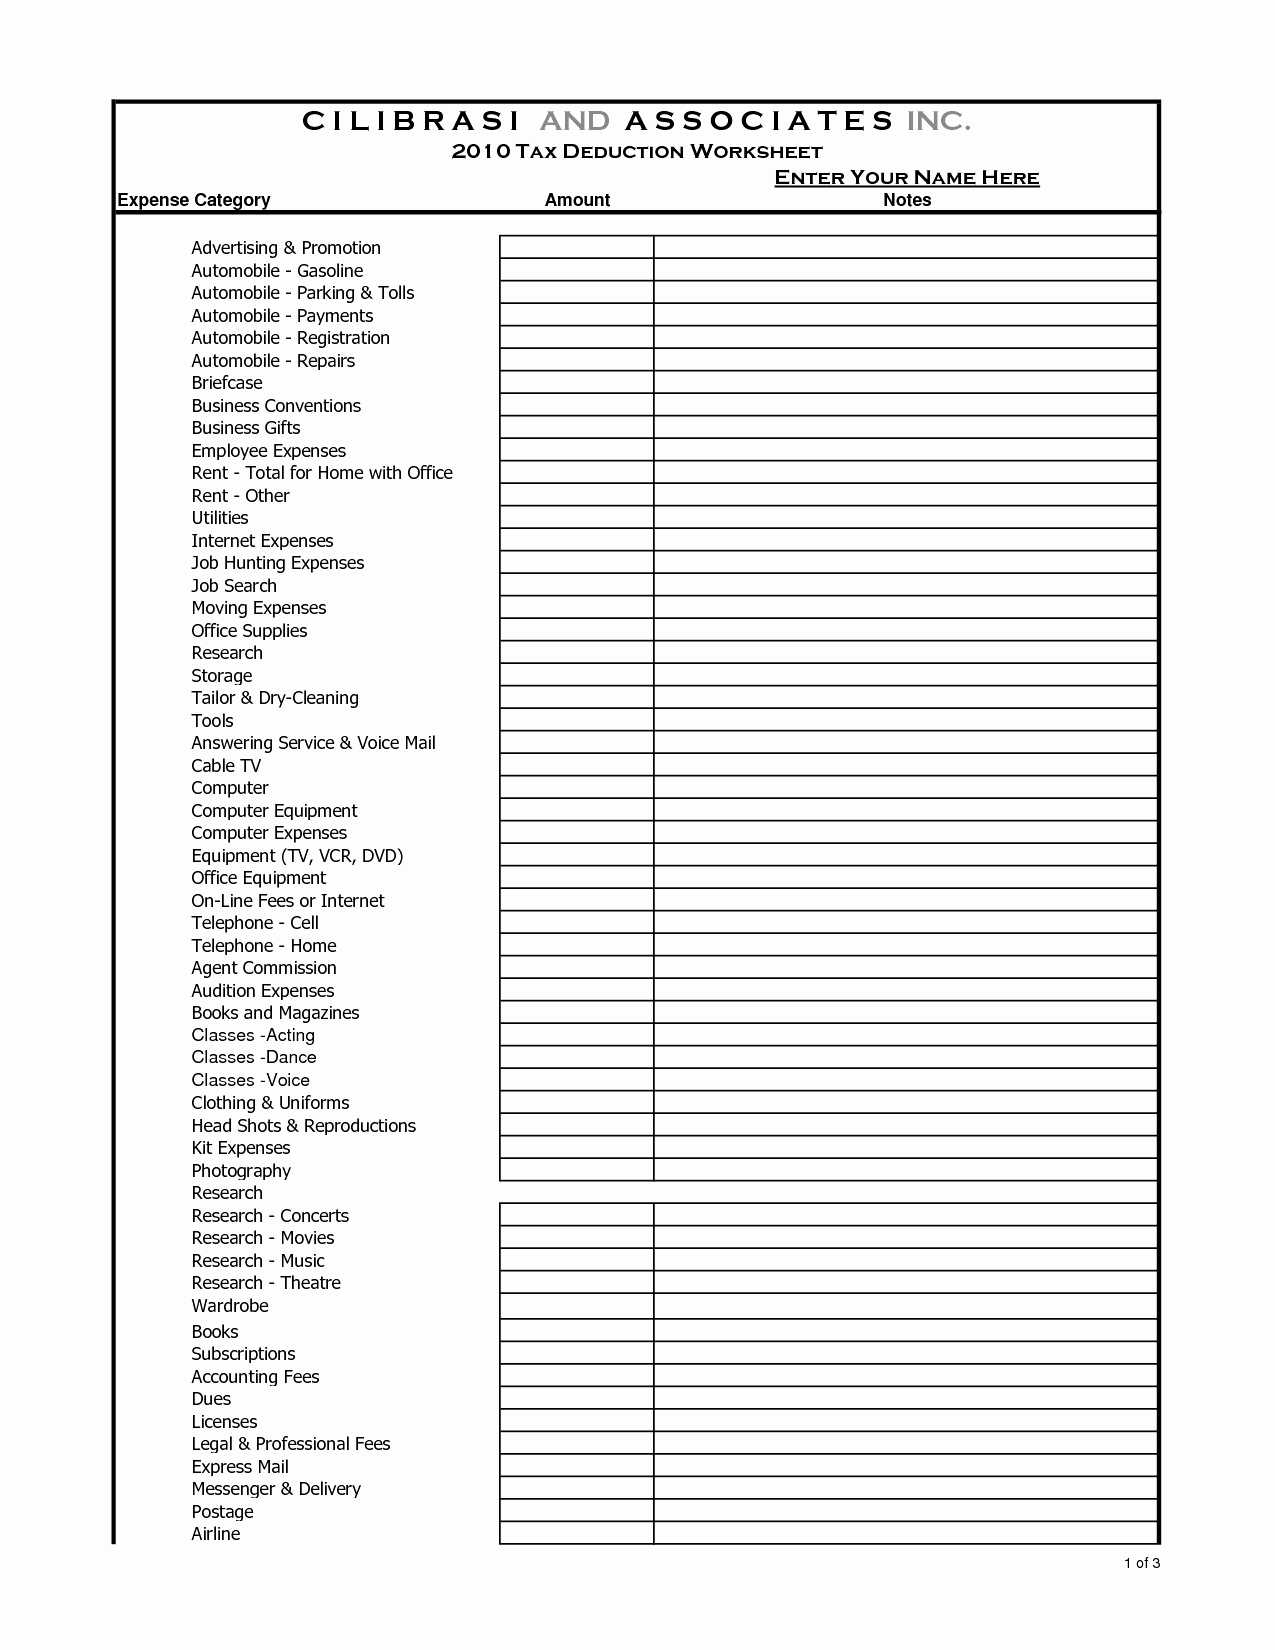 Itemized Deductions Worksheet with Student Loan Interest Deduction Worksheet Business Itemized